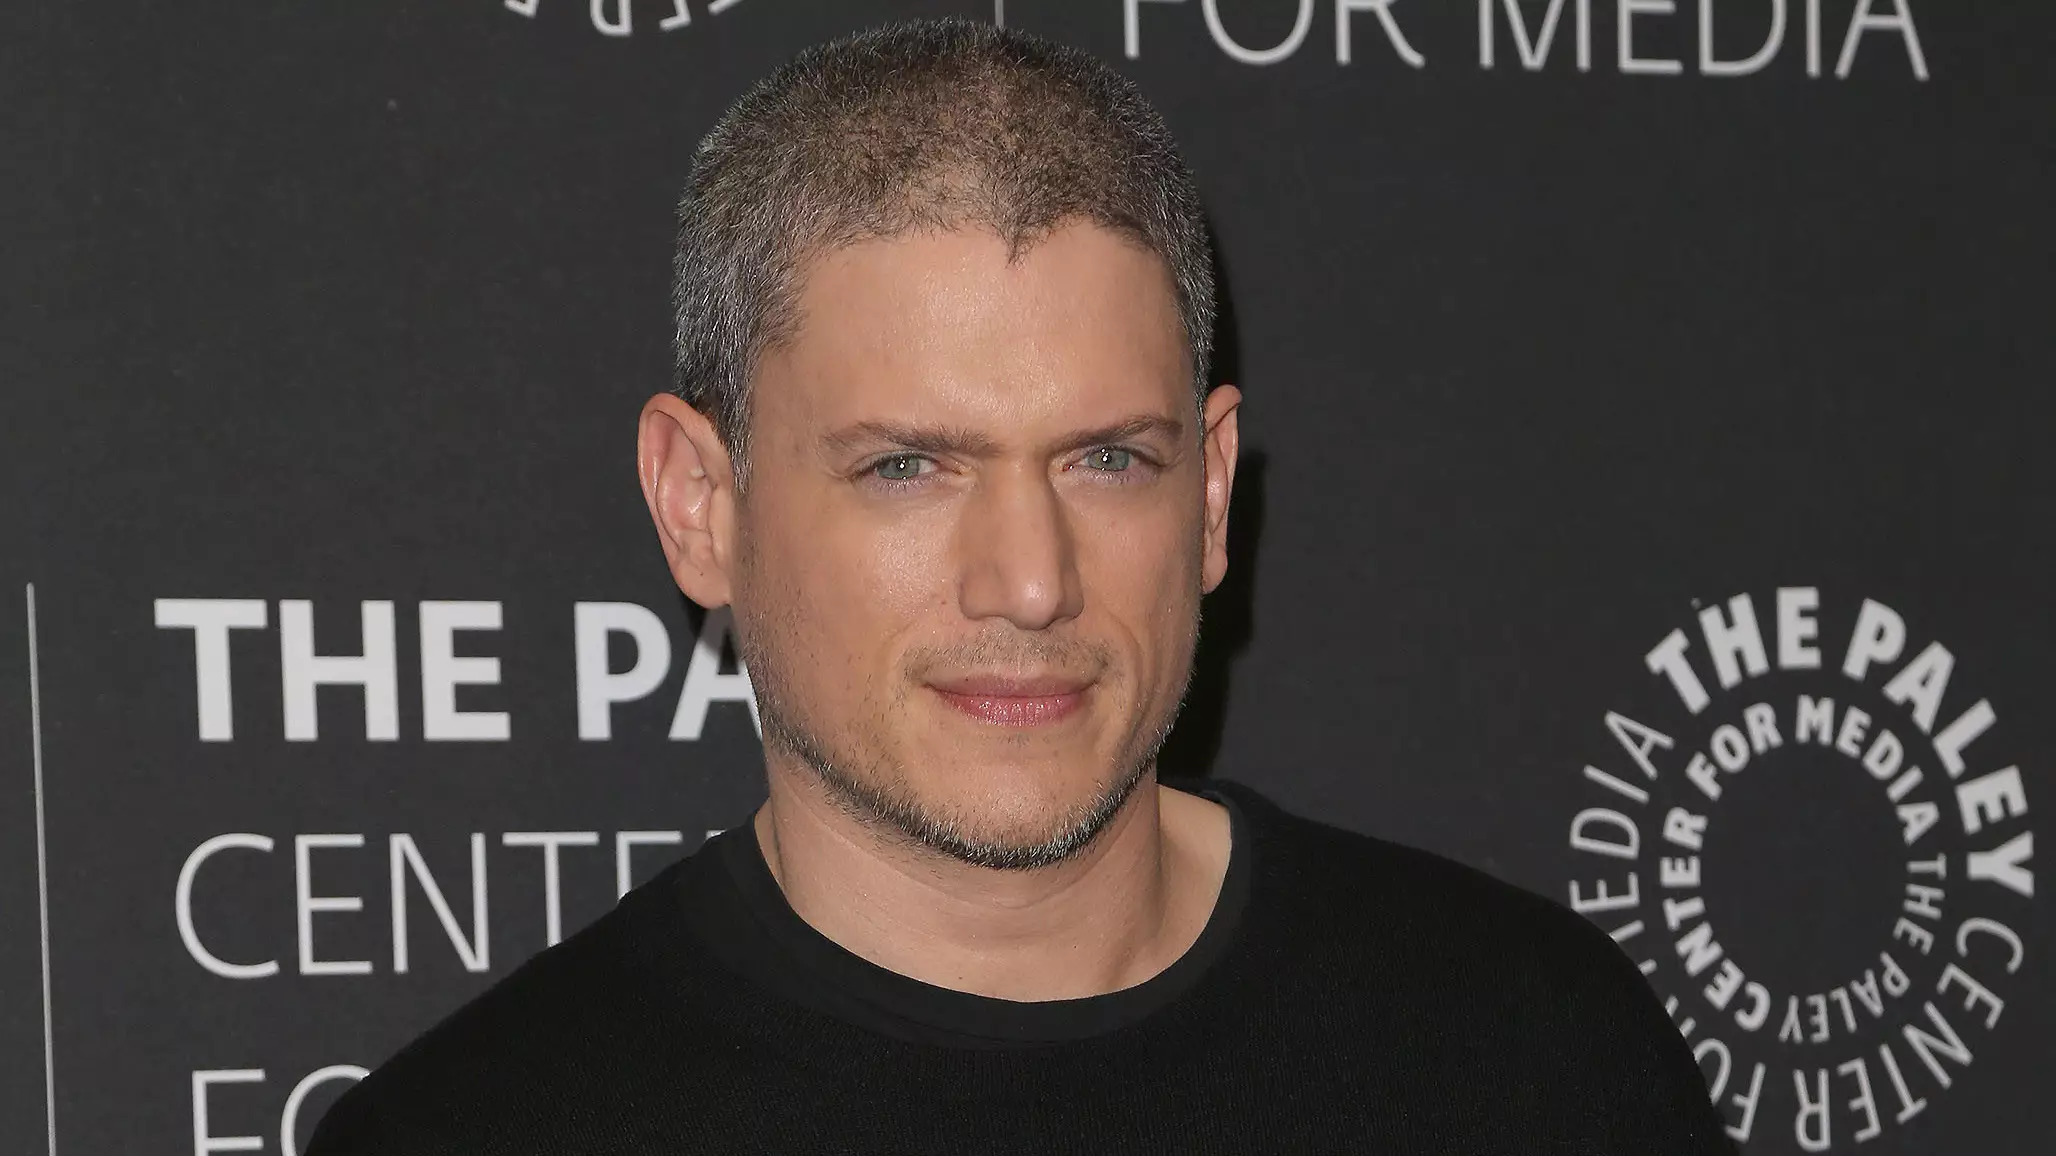 Wentworth Miller Announces He Has Been Diagnosed With Autism